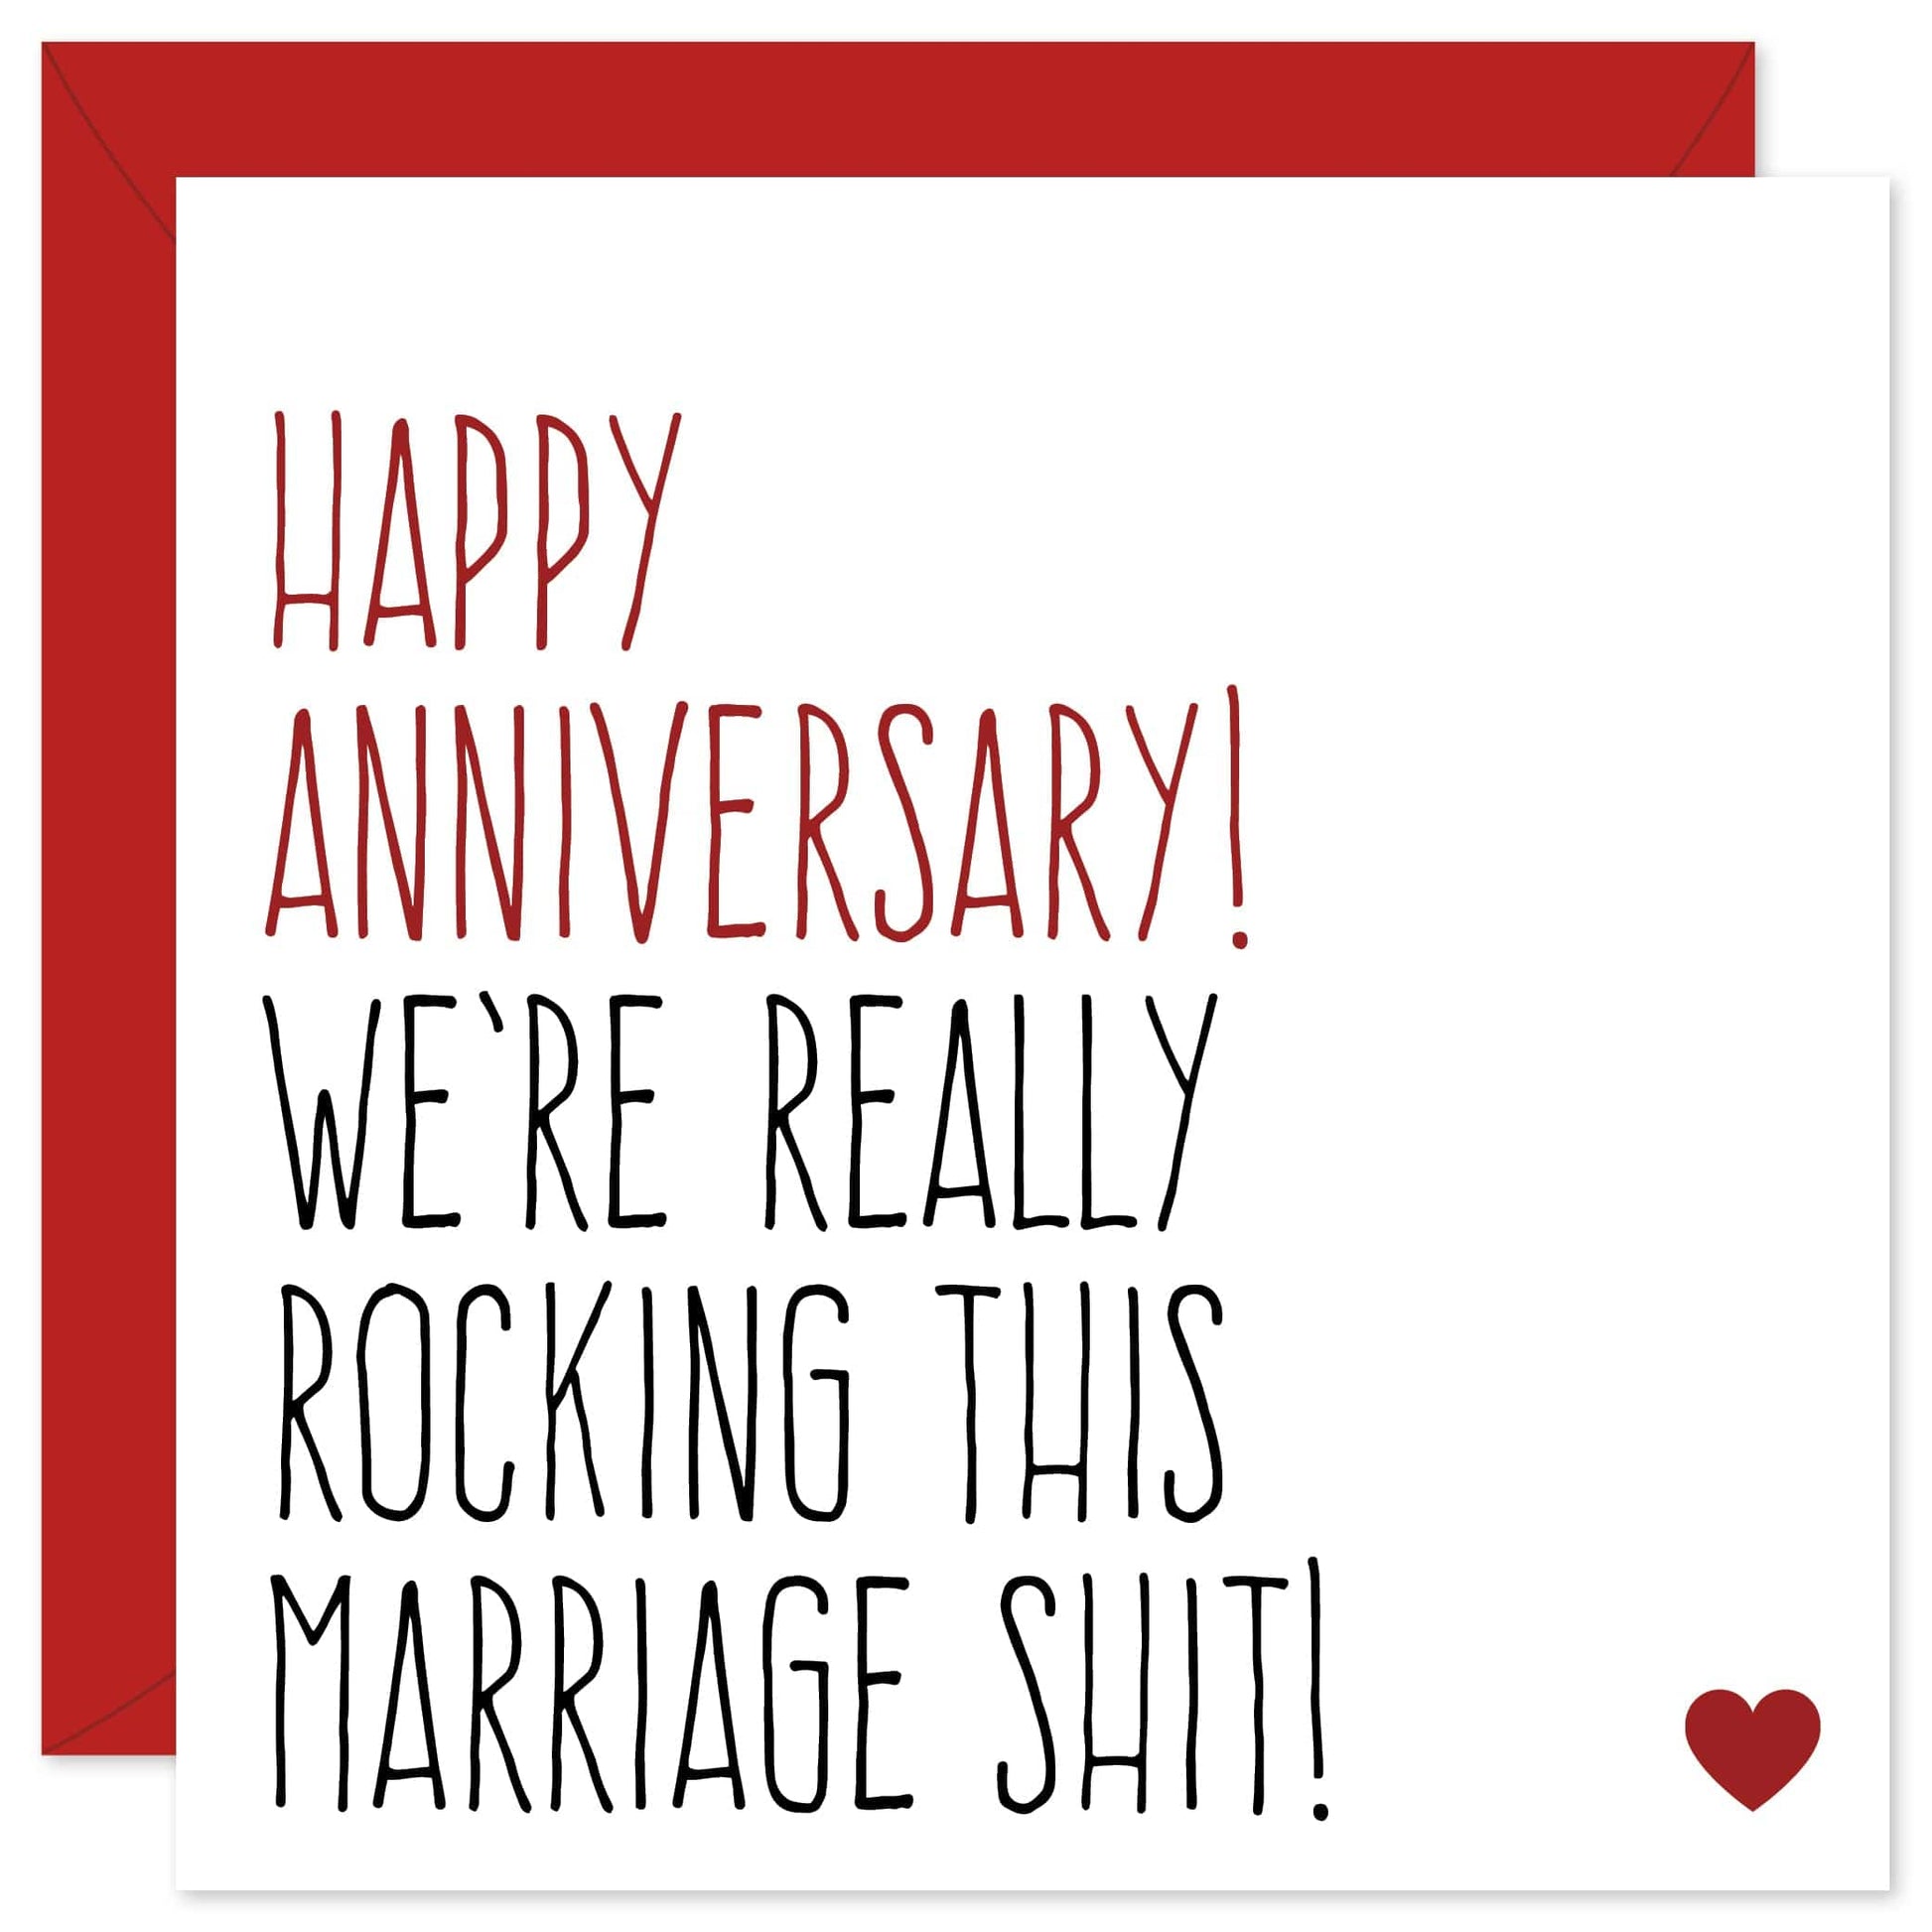 Rocking this marriage shit anniversary card from Purple Tree Designs